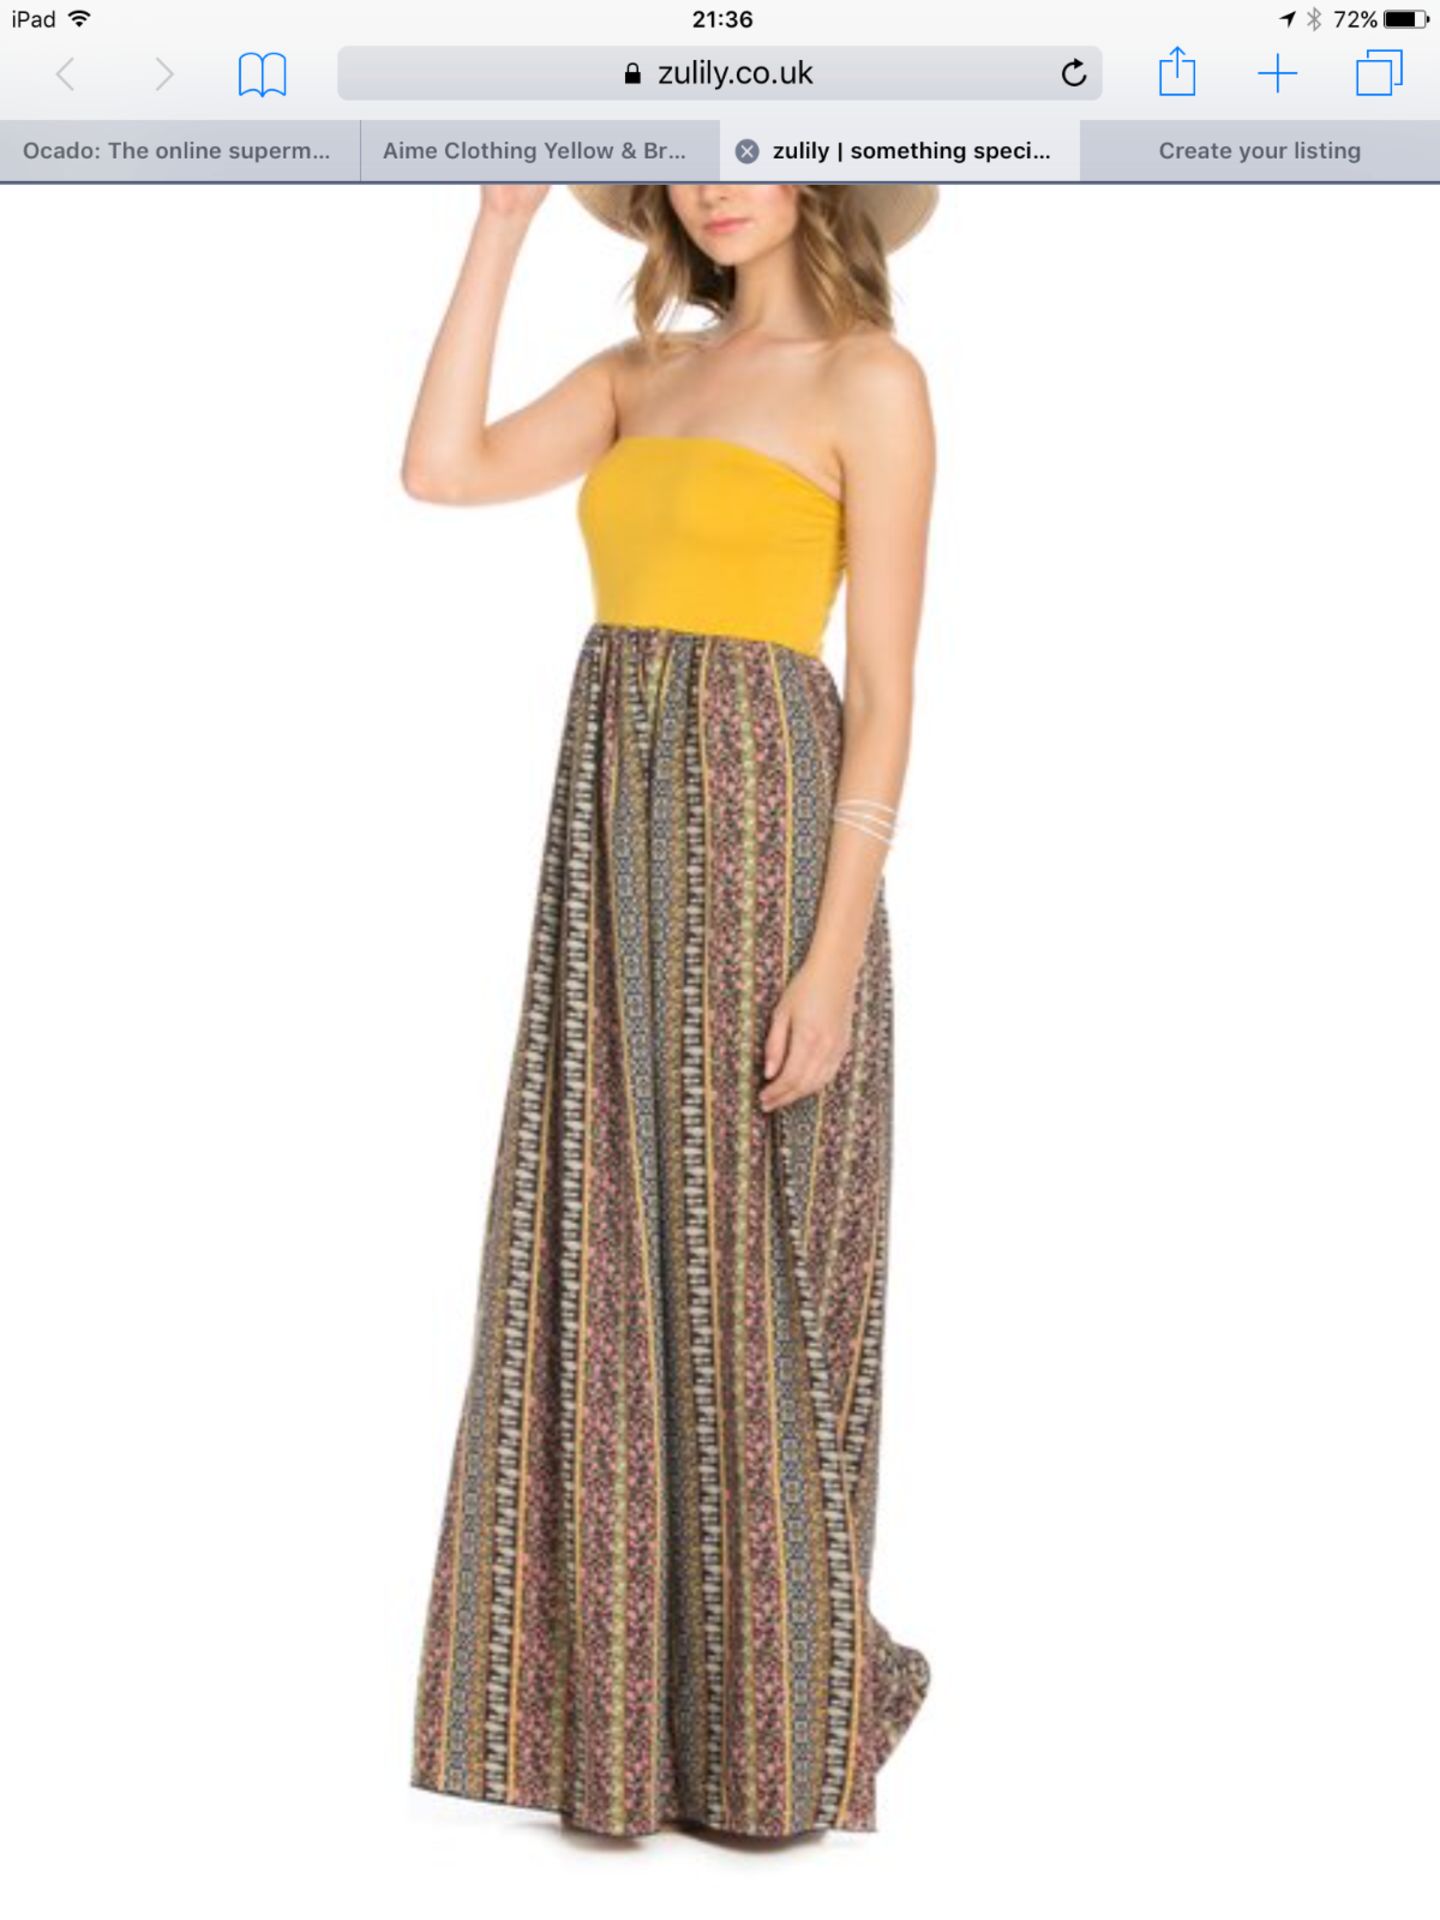 Aime Clothing Yellow & Brown Paisley Strapless Maxi Dress, Size Small (New with tags) [Ref: - Image 2 of 4